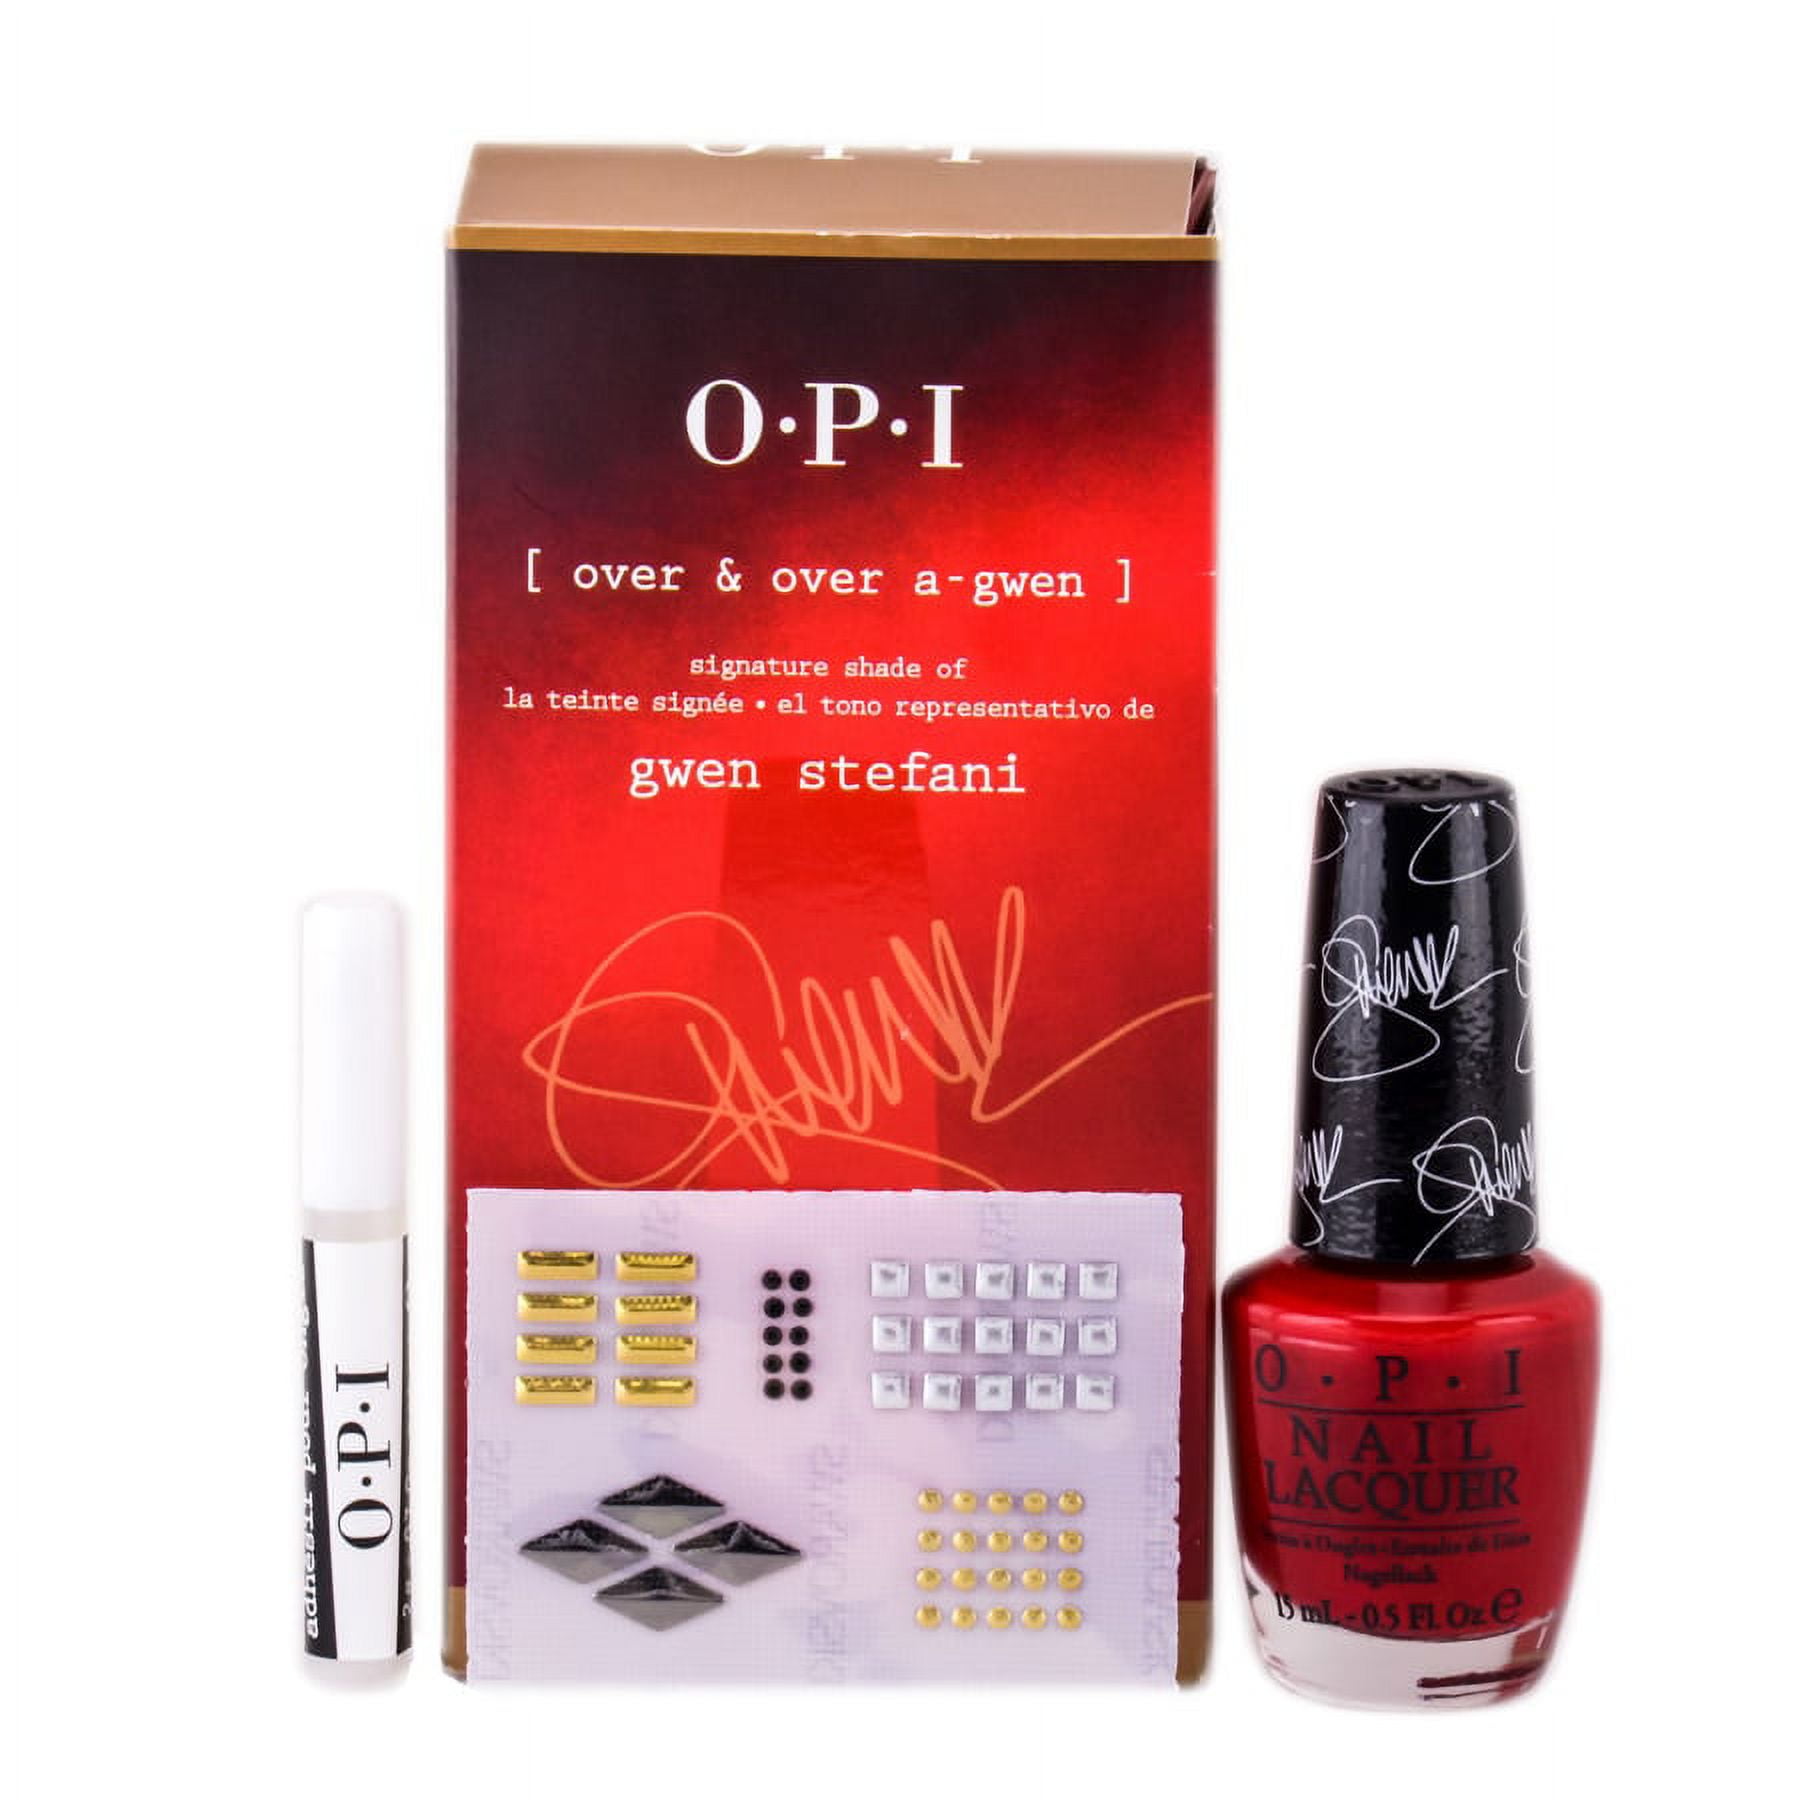 OPI Gwen Stefani Over & Over A-Gwen Set - Review and Swatches